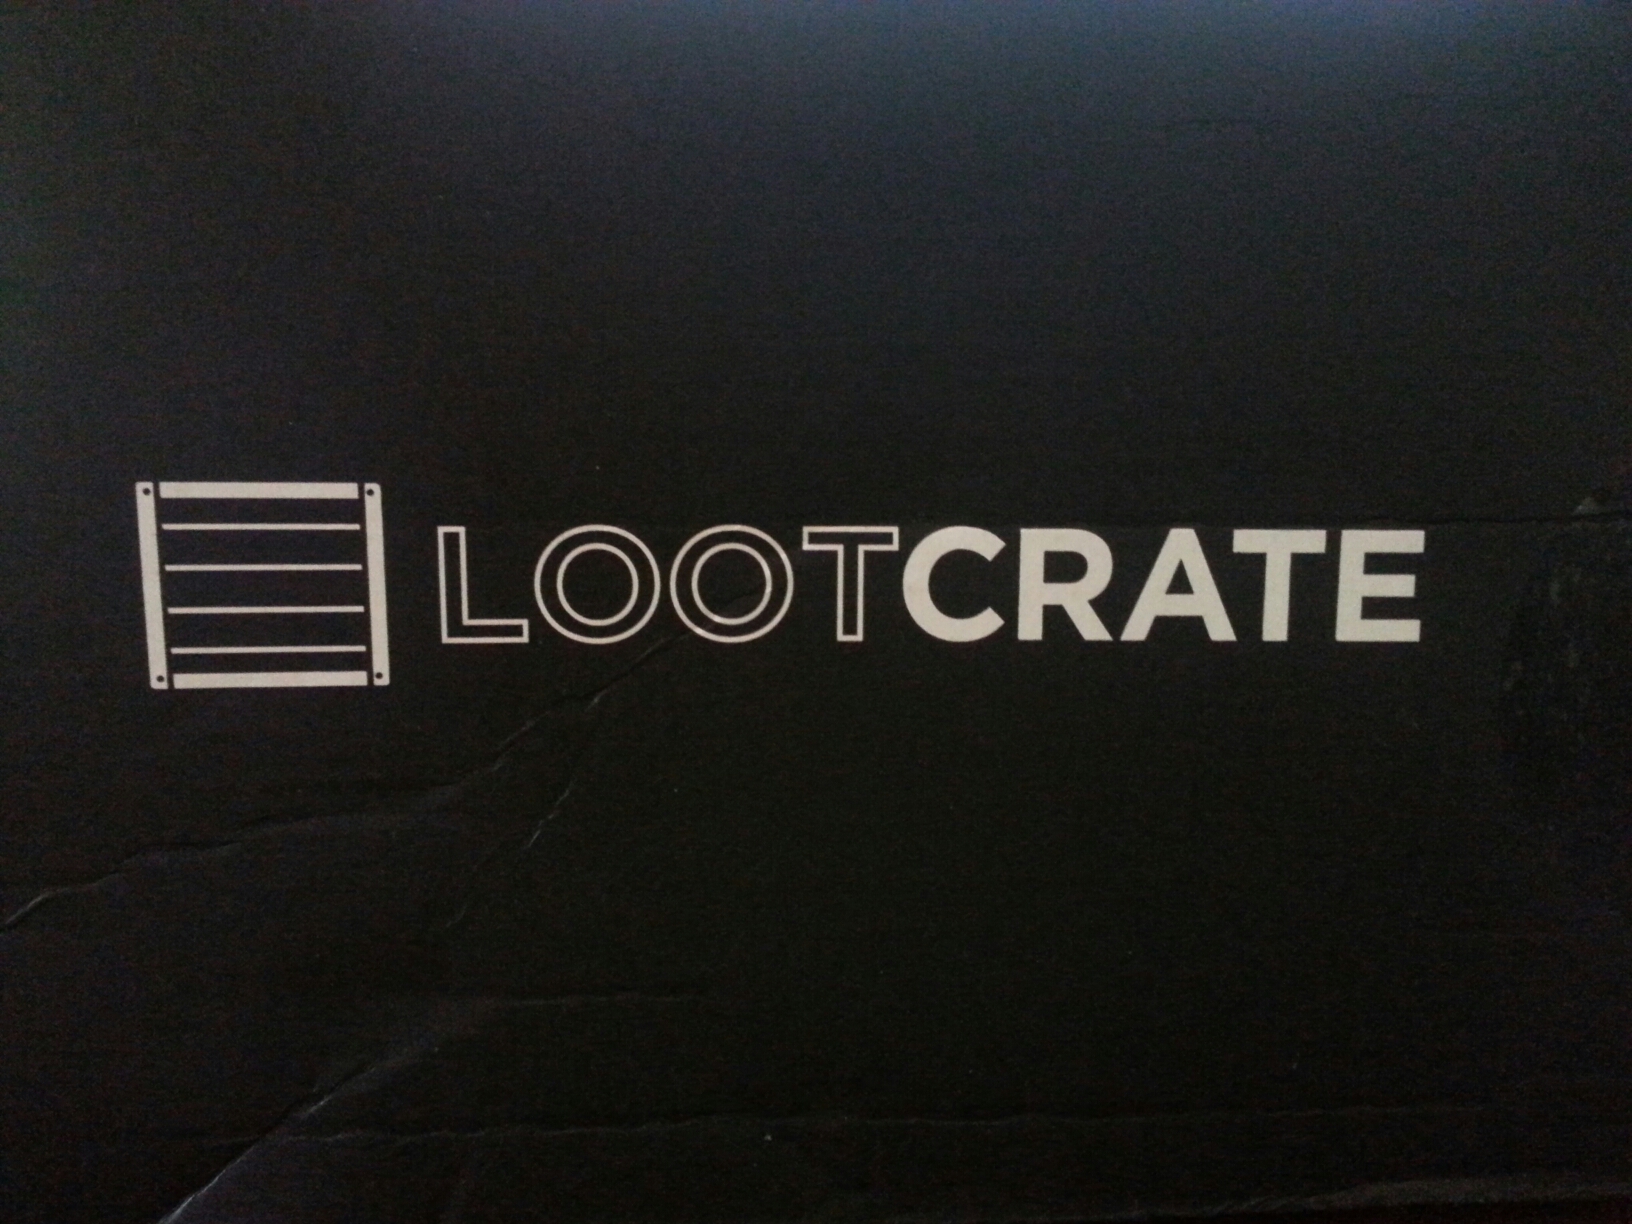 Loot crate review and unboxing for august 2014: heroes theme